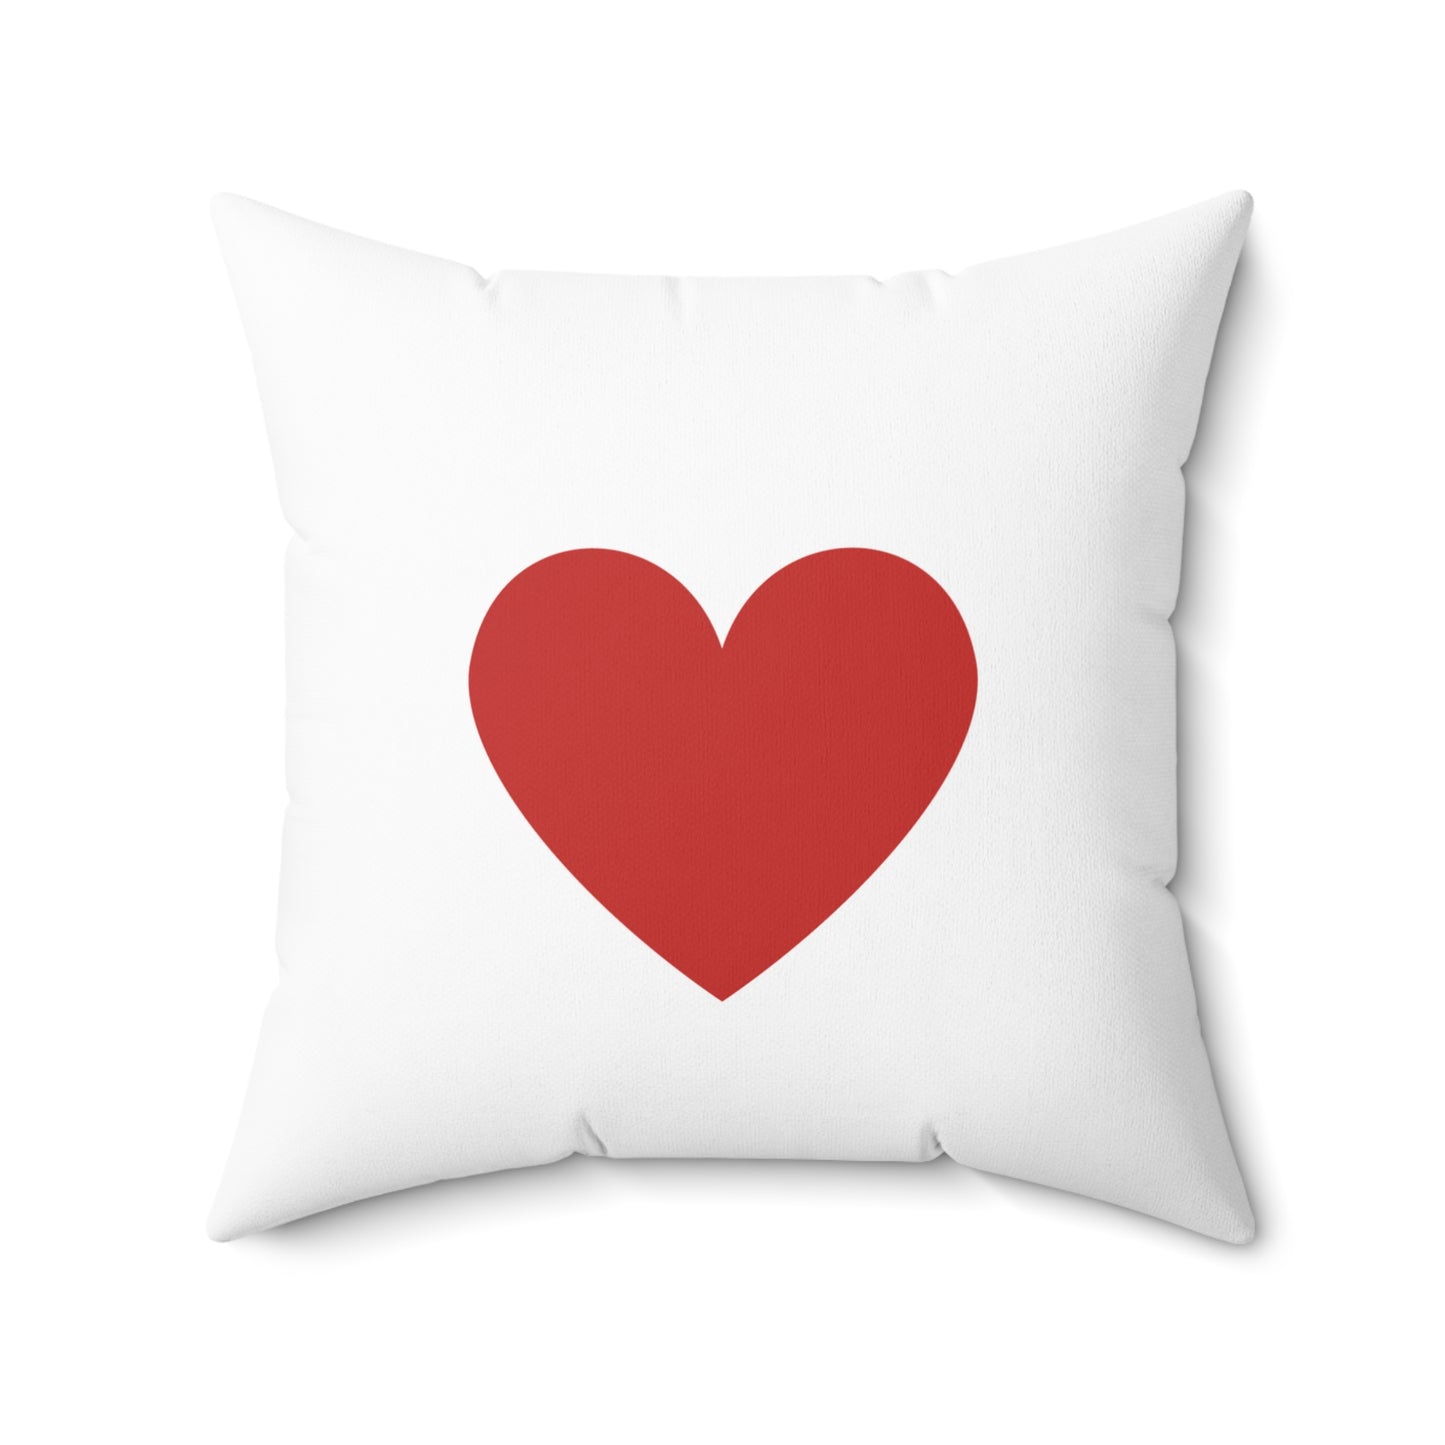 Love You Printed Spun Polyester Sqaure Pillow Case for Valentine